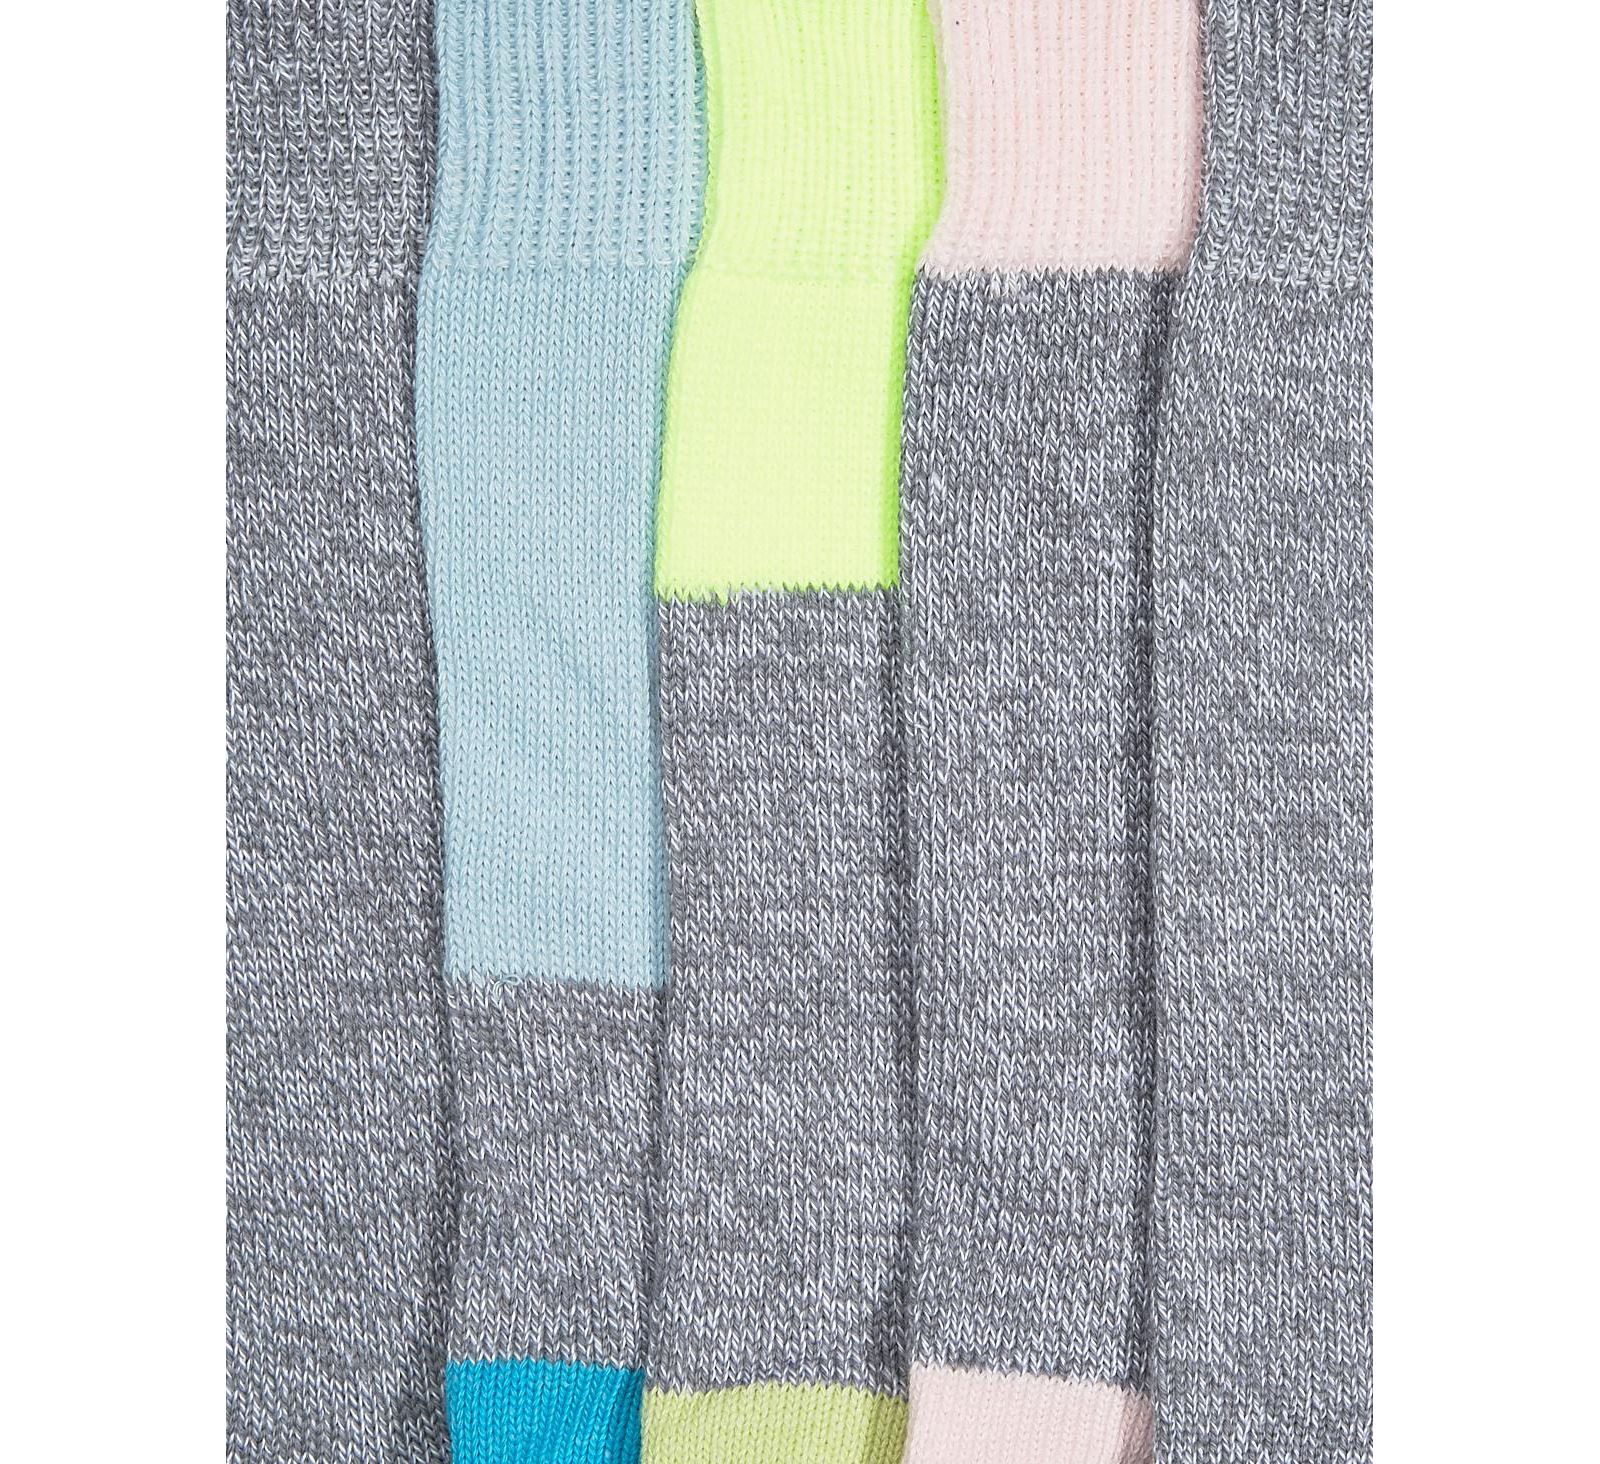 ASOS Boot Socks With Neon & Pastel Panels 5 Pack